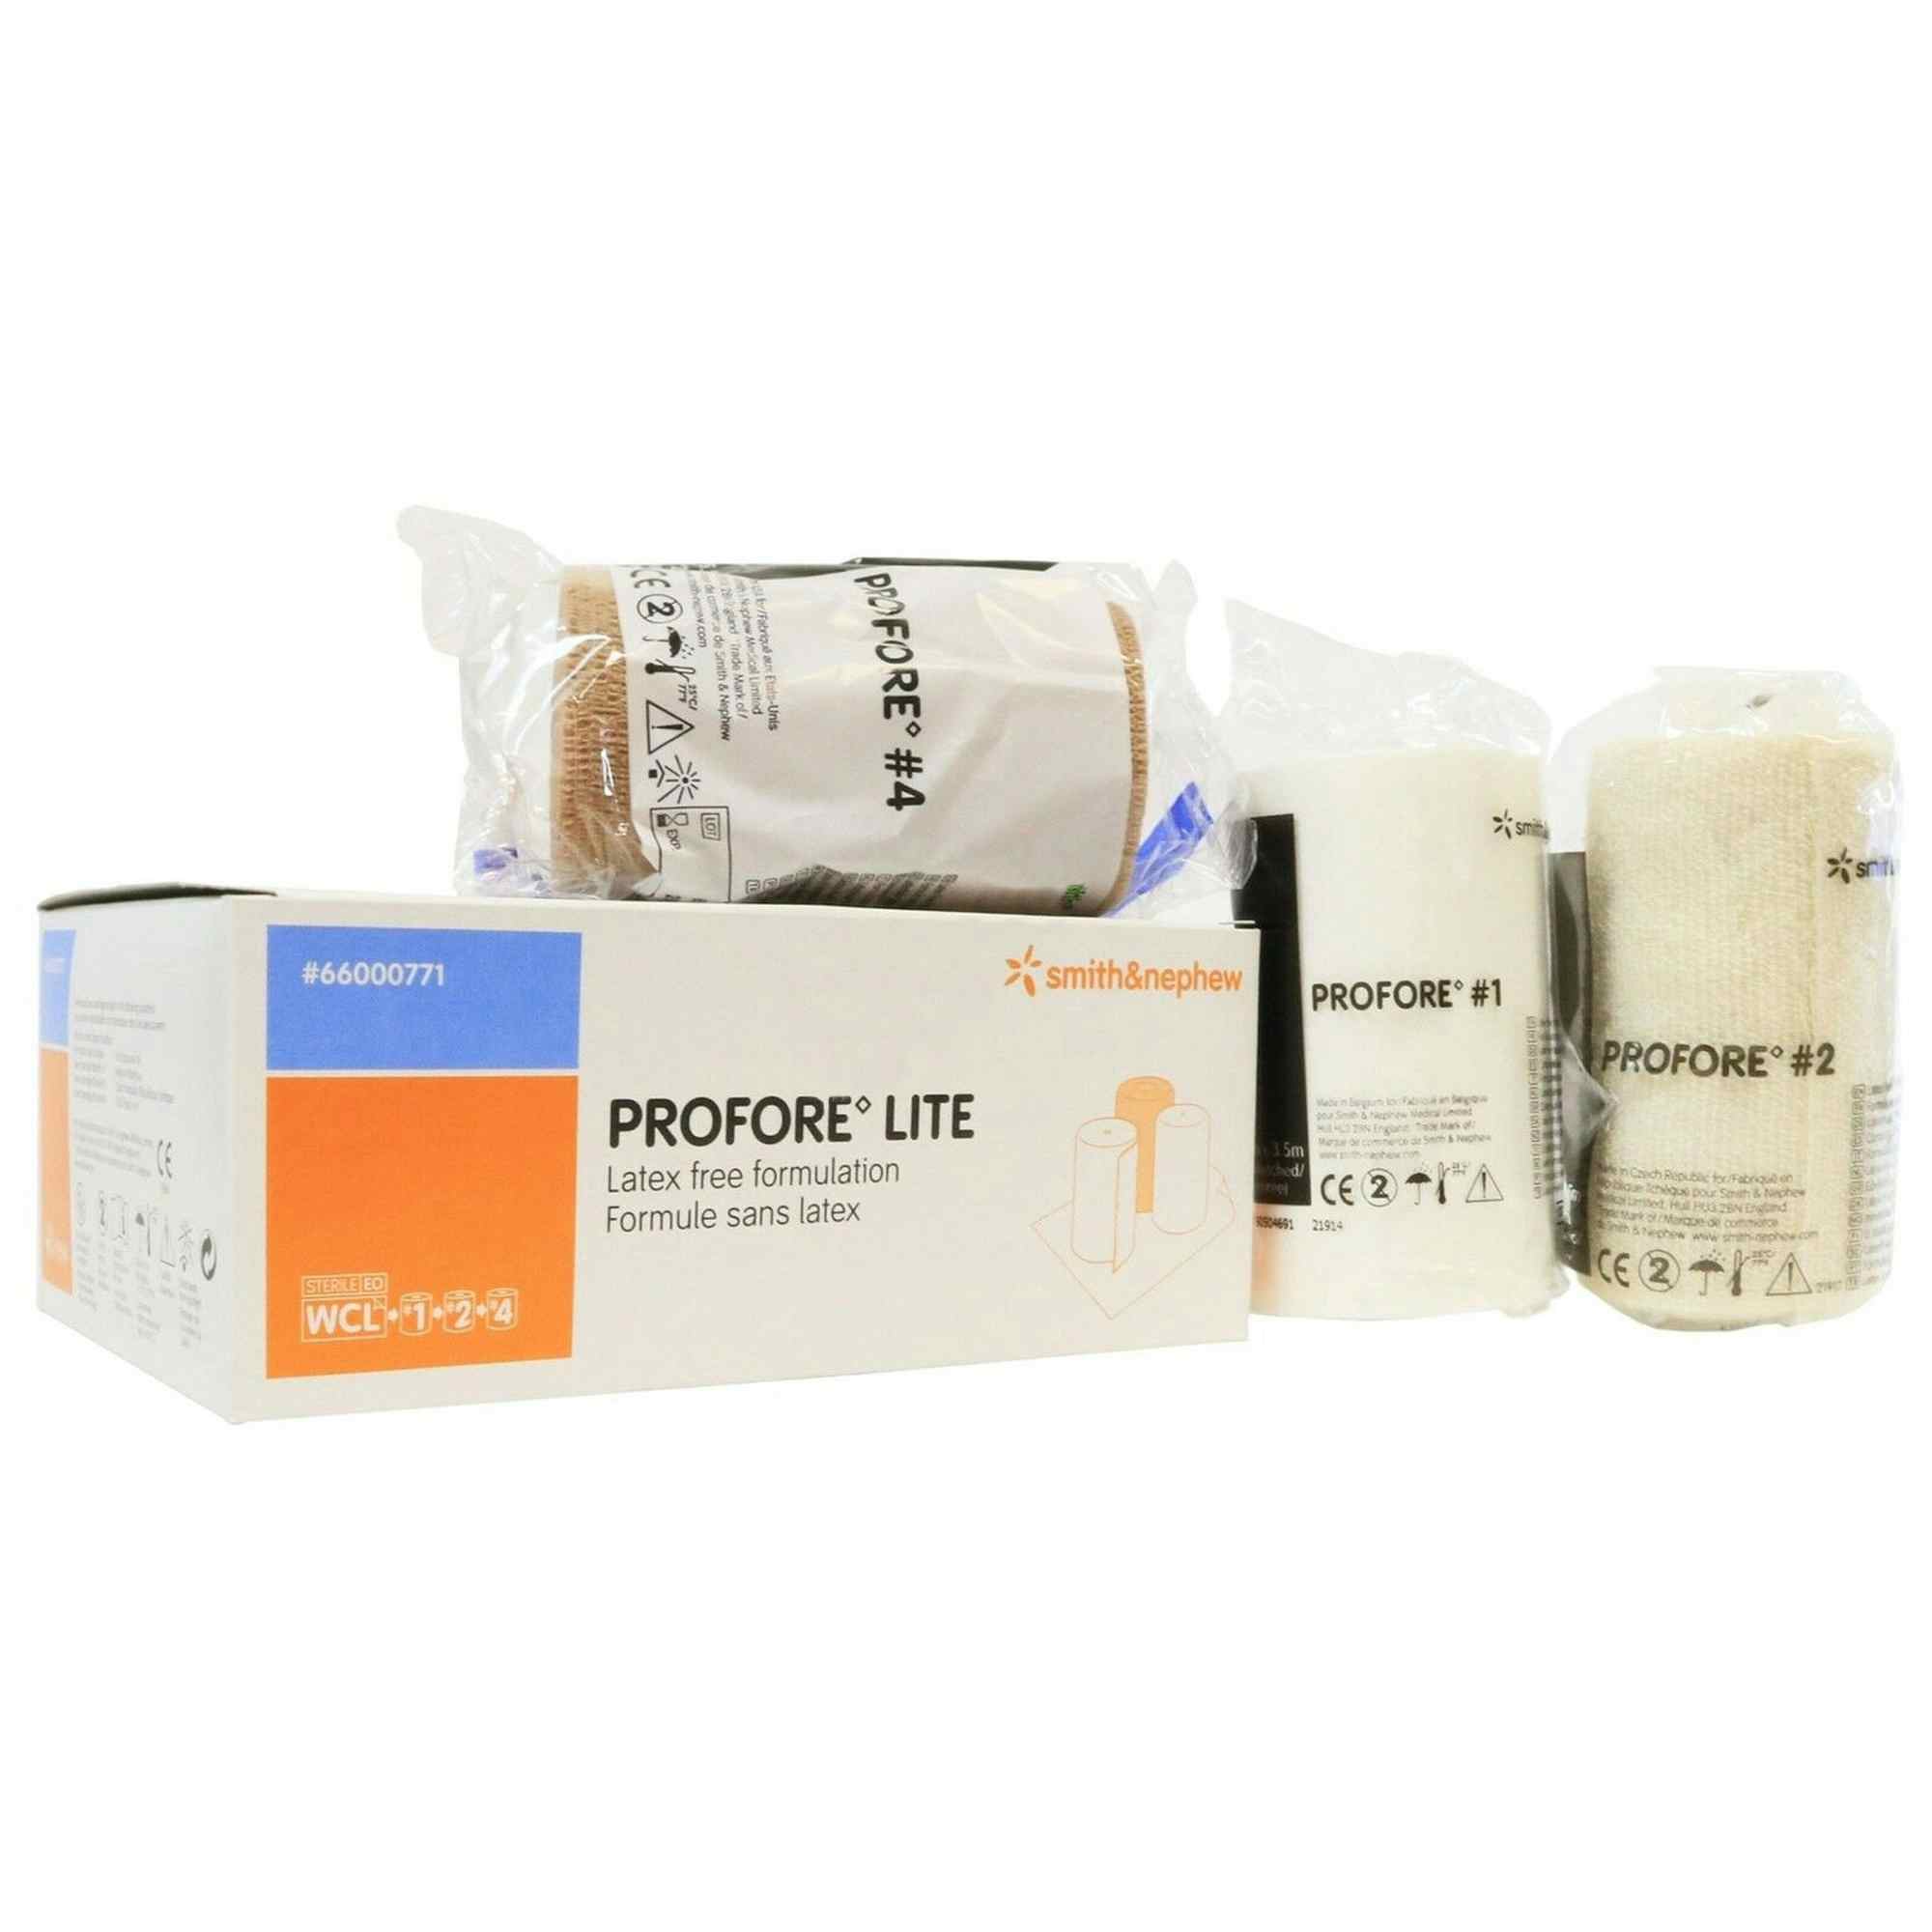 Smith & Nephew Profore Lite 3-Layer Compression Bandage System, 66000771, 1 Pack